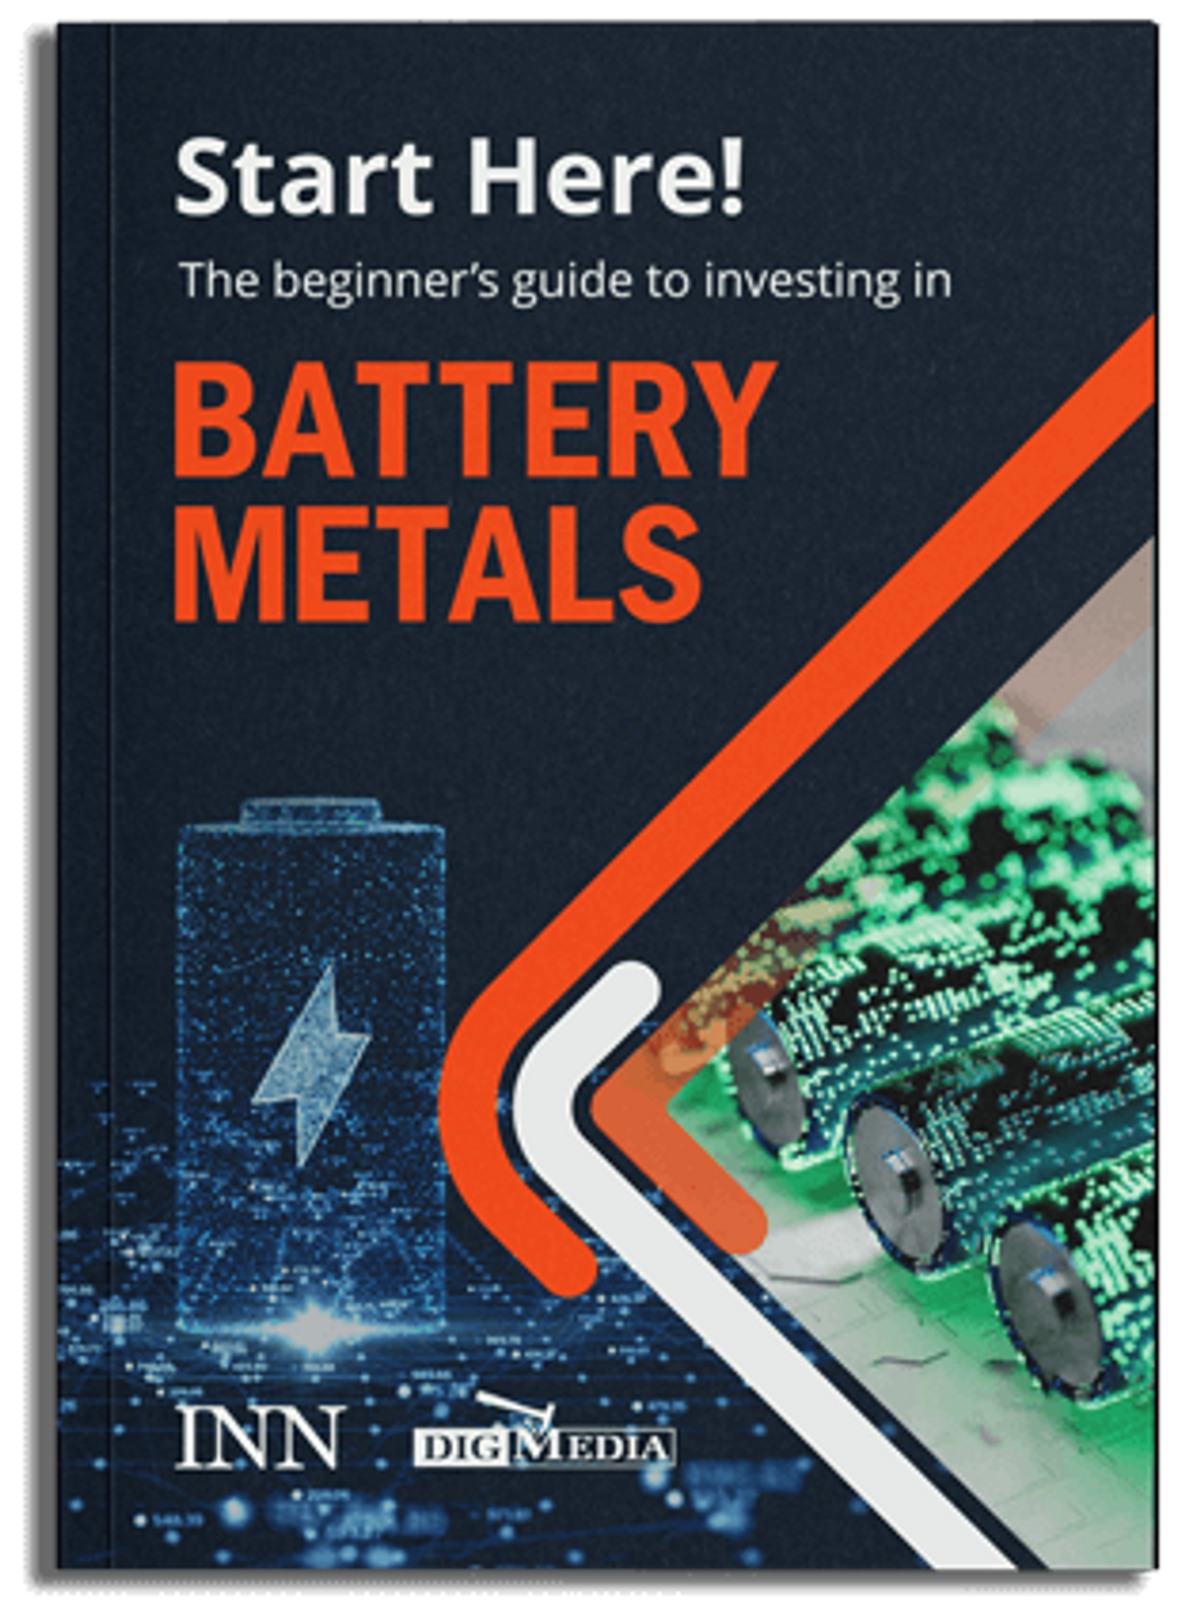 The Beginner's Guide to Investing in Battery Metals